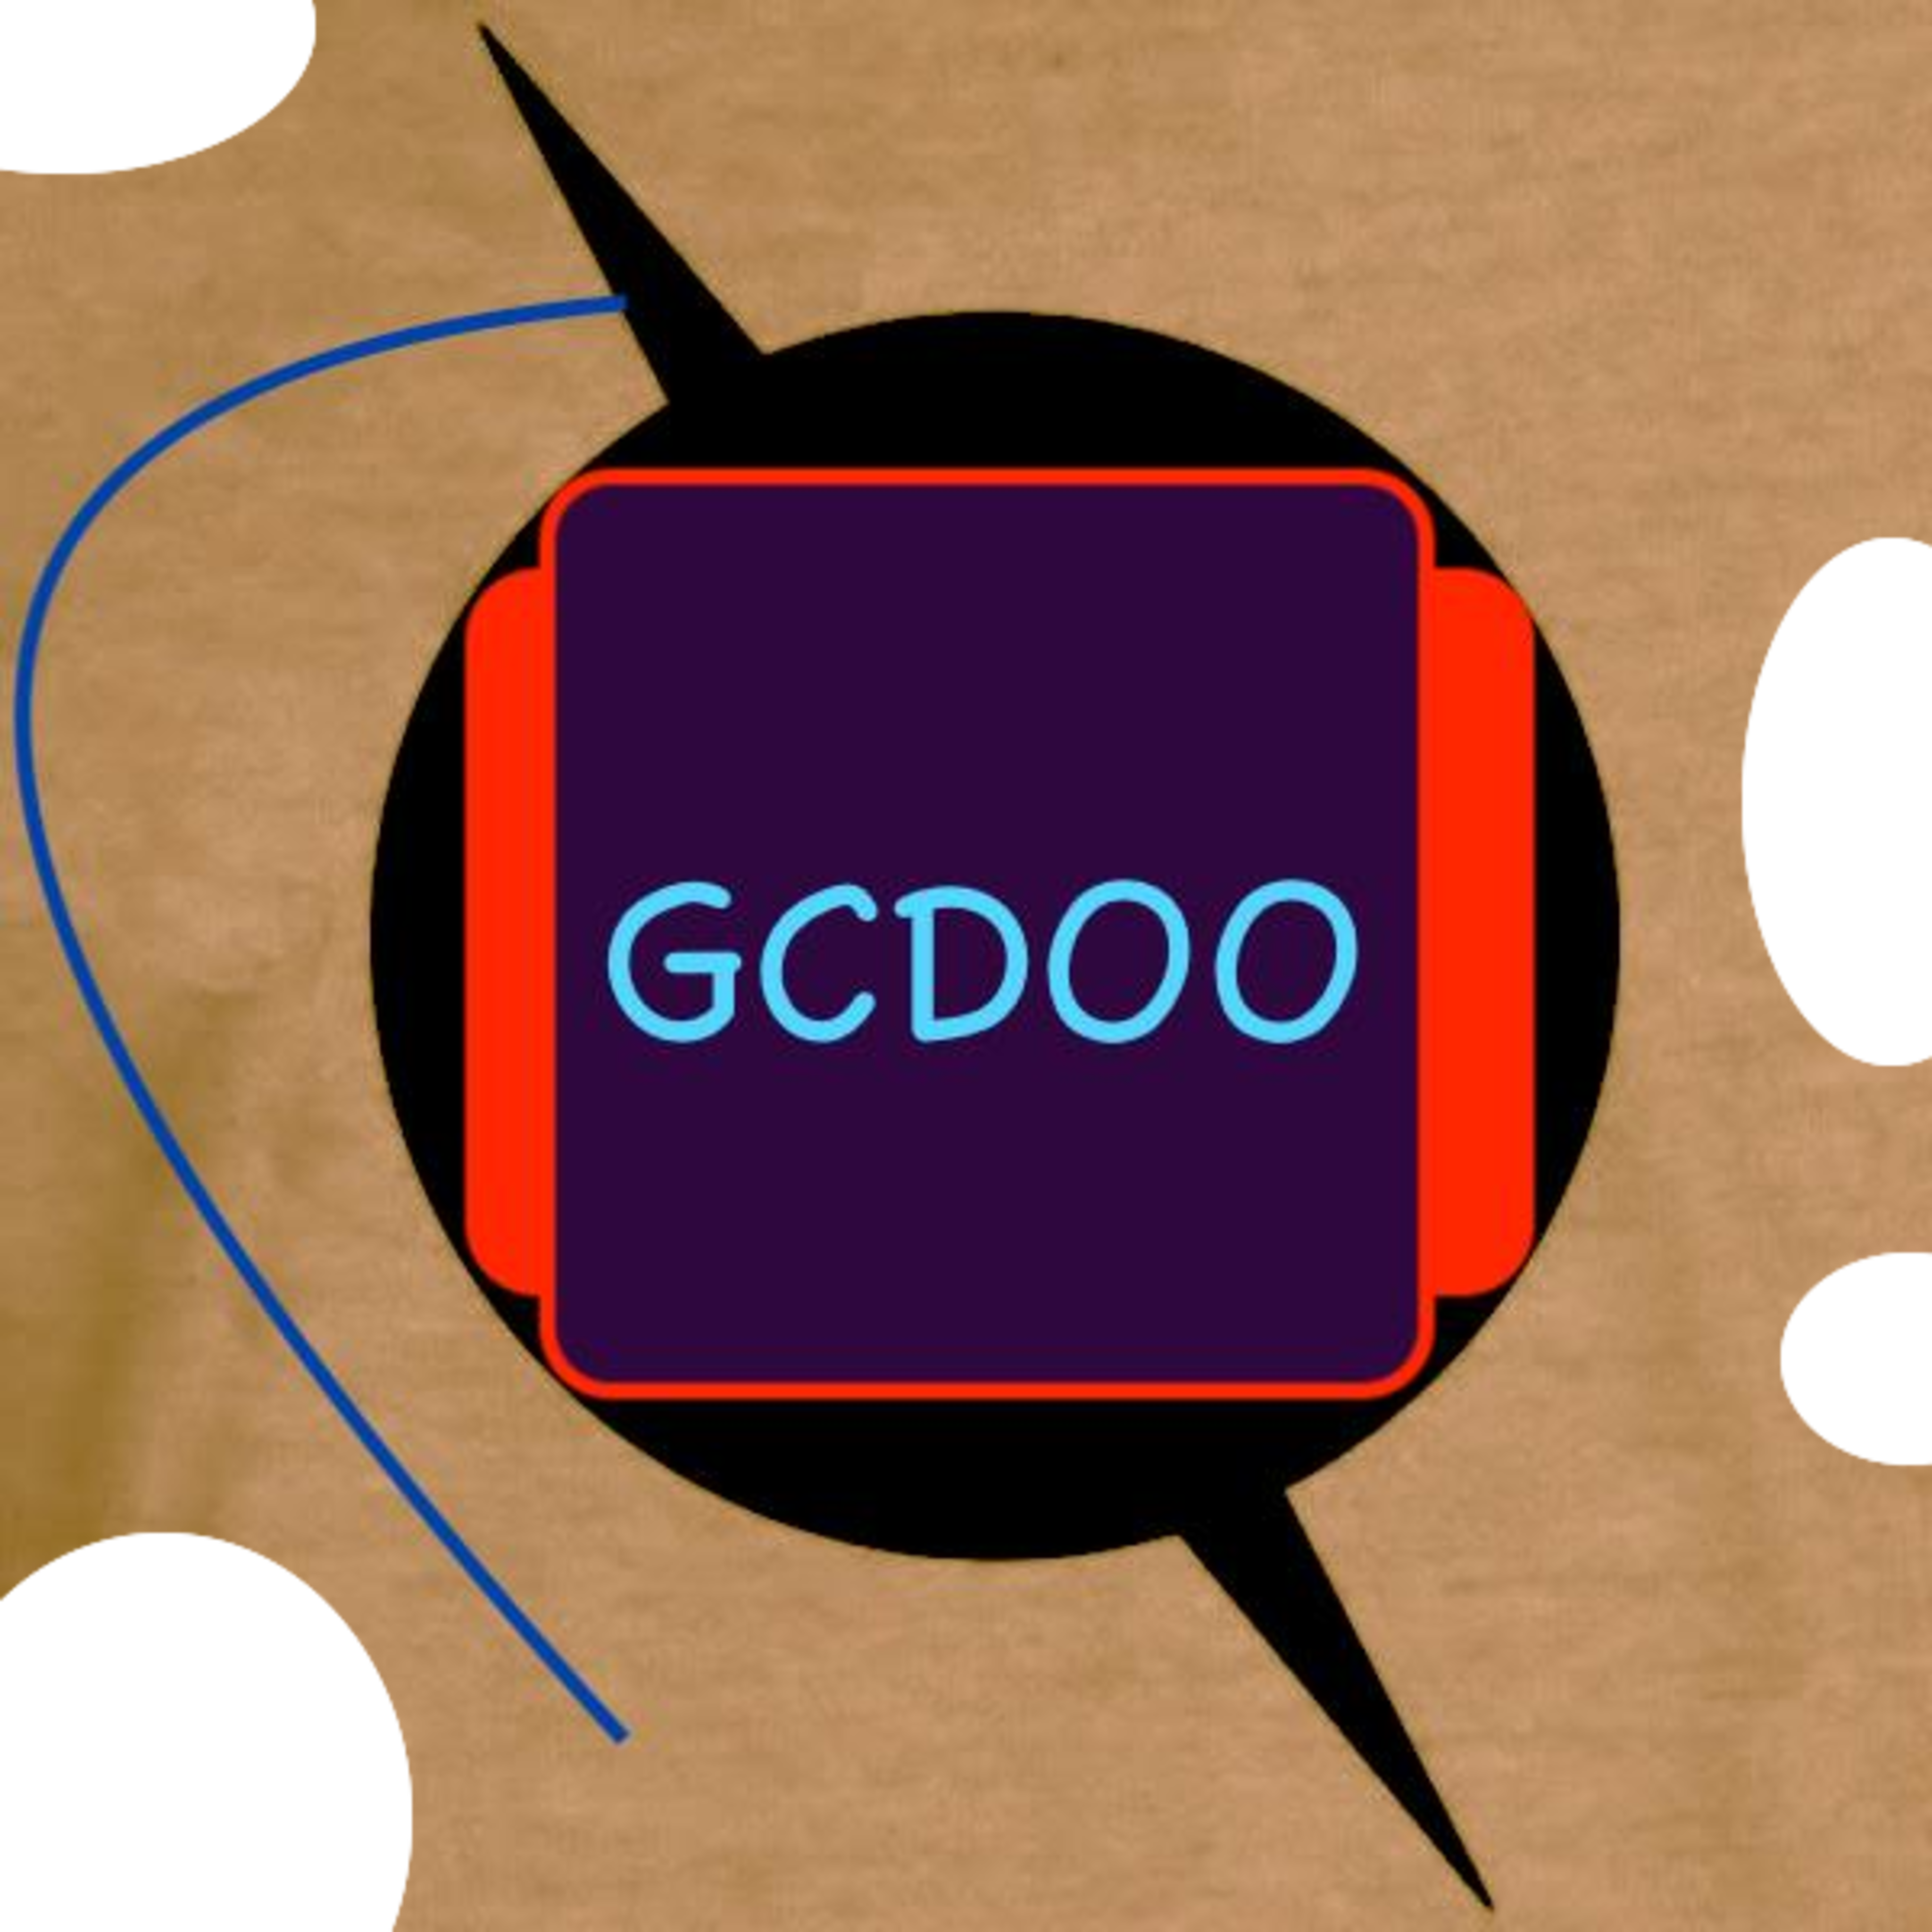 GCDOO: The most useful theorem in the universe